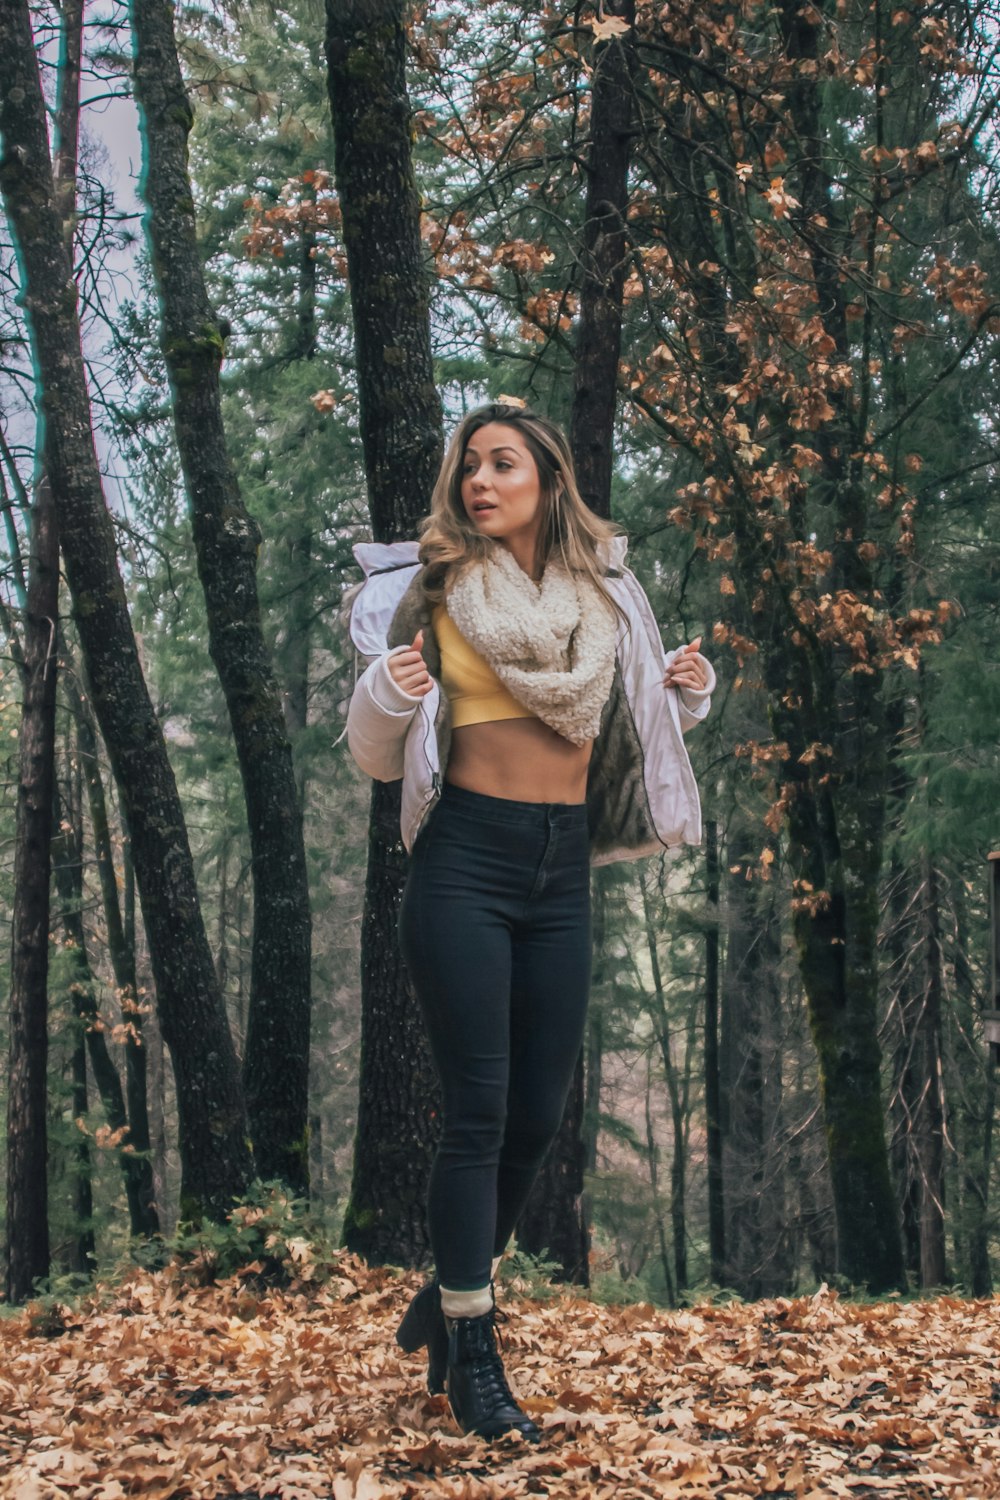 Woman in black pants standing in forest photo – Free Ca Image on Unsplash